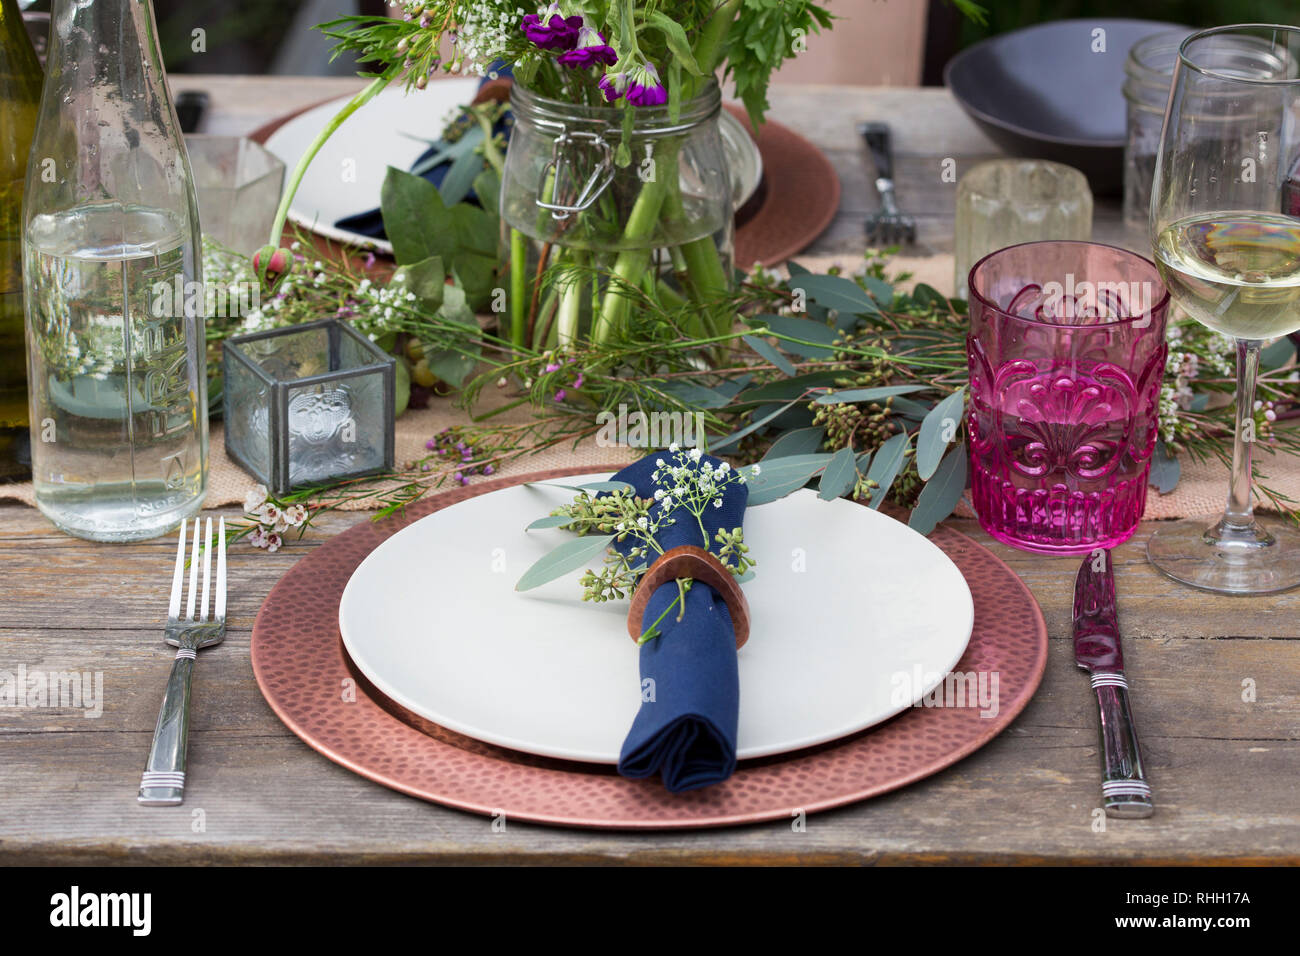 Blue napkin in ring on white plate with copper charger, place setting on wooden outdoor dinner party dining table with flowers, glass, and candle. Stock Photo